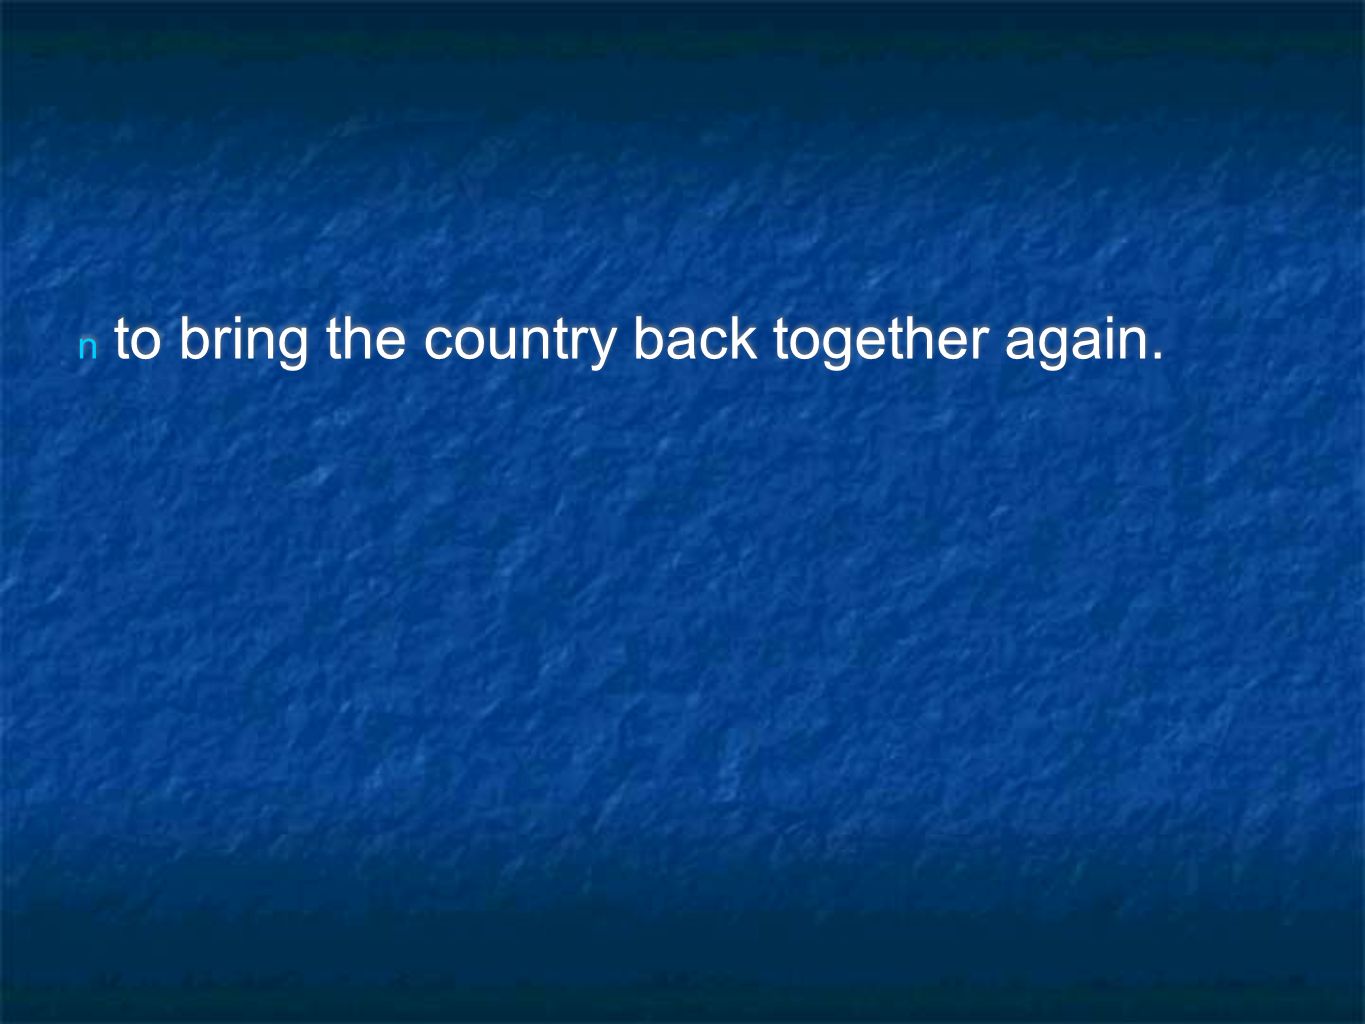 n to bring the country back together again.